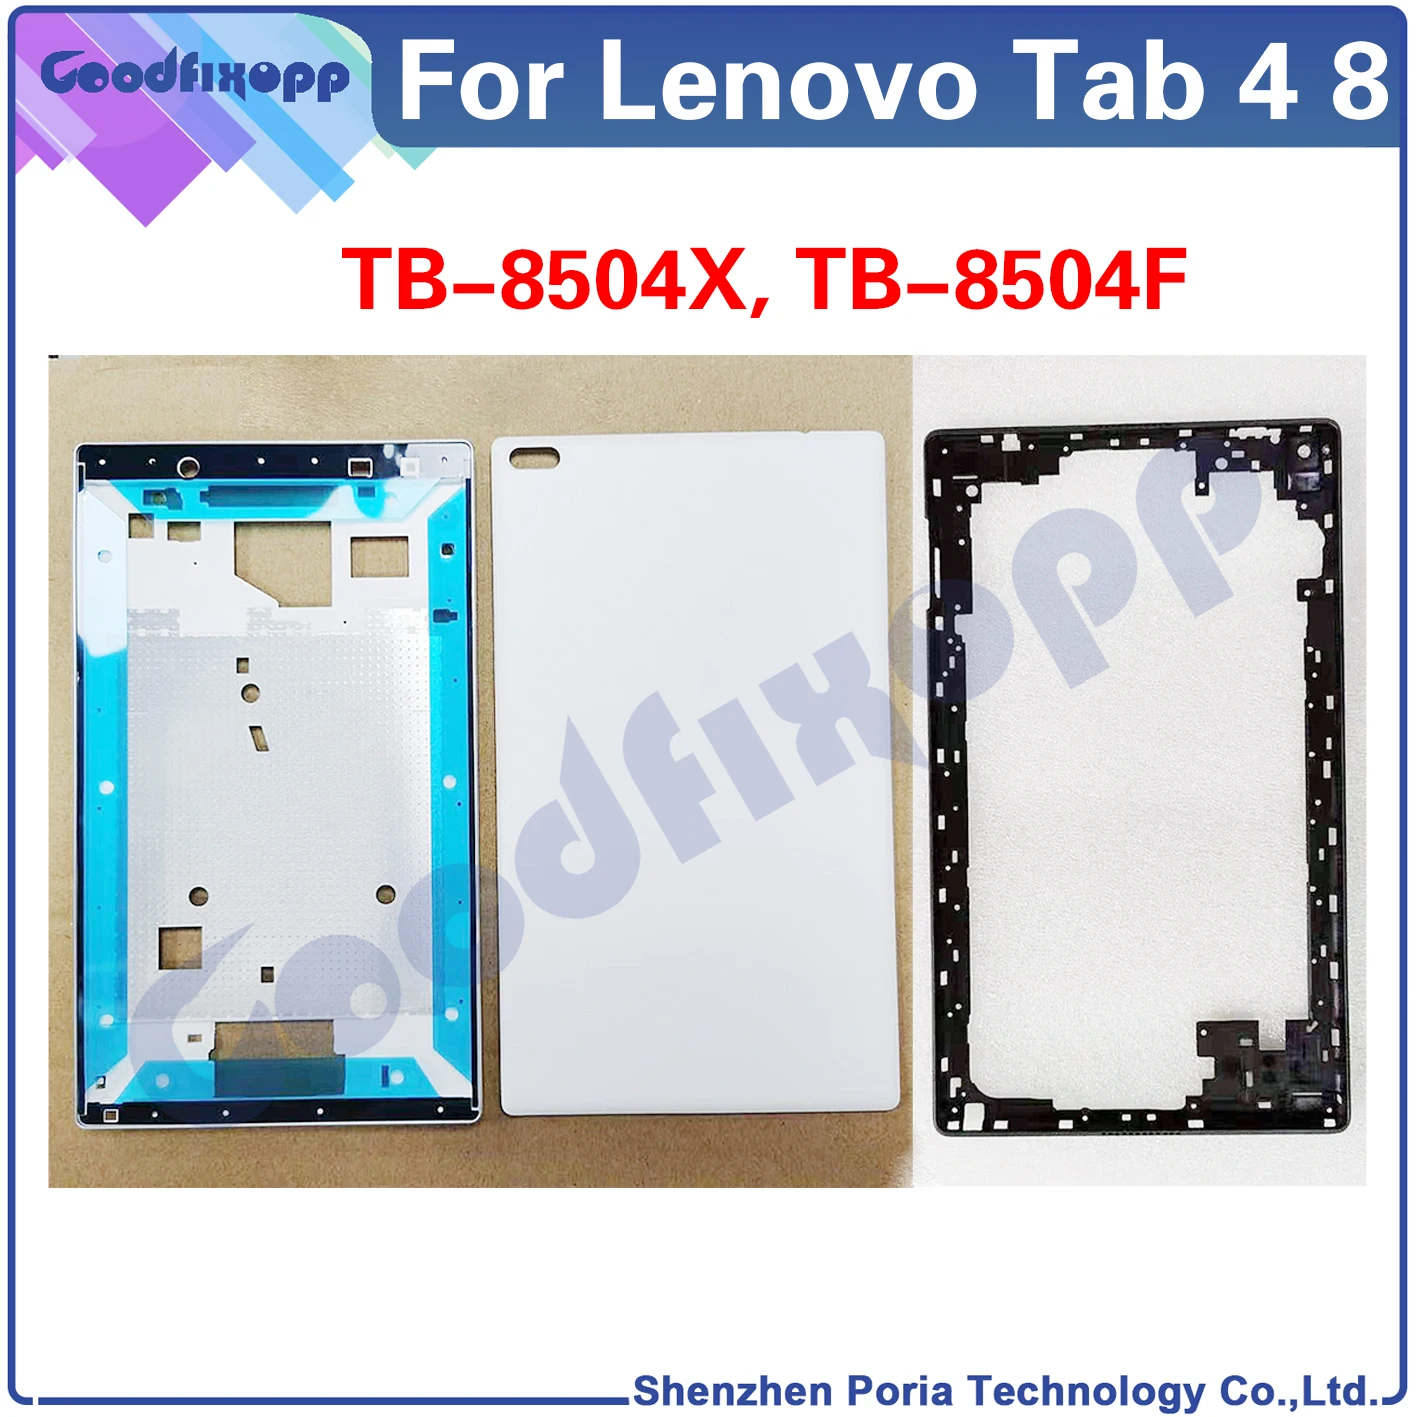 For Lenovo Tab 4 8 TB-8504X TB-8504F Middle Lid Front Frame Battery Back Cover Rear Case Cover For Lenovo Tab 4 8